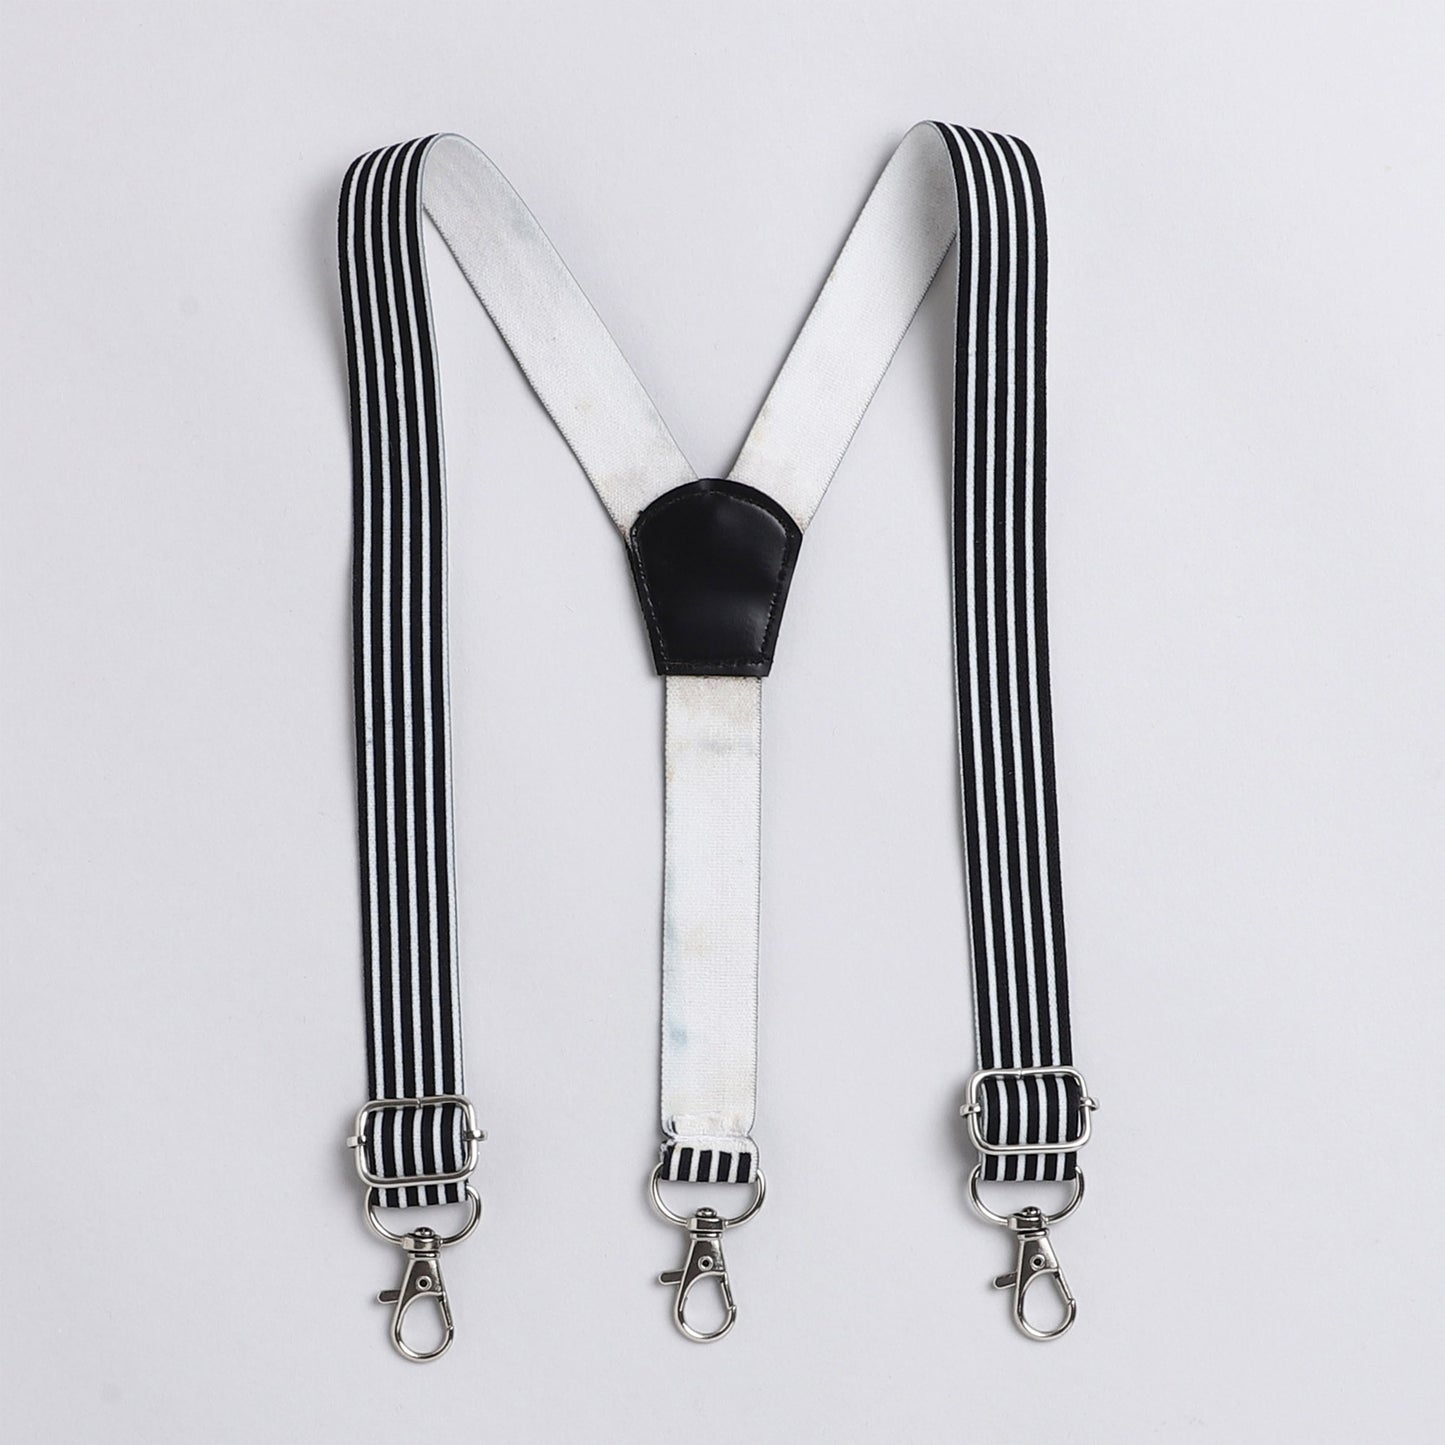 Polka Tots plain party shirt with wood bow tie and stripe suspender - Black